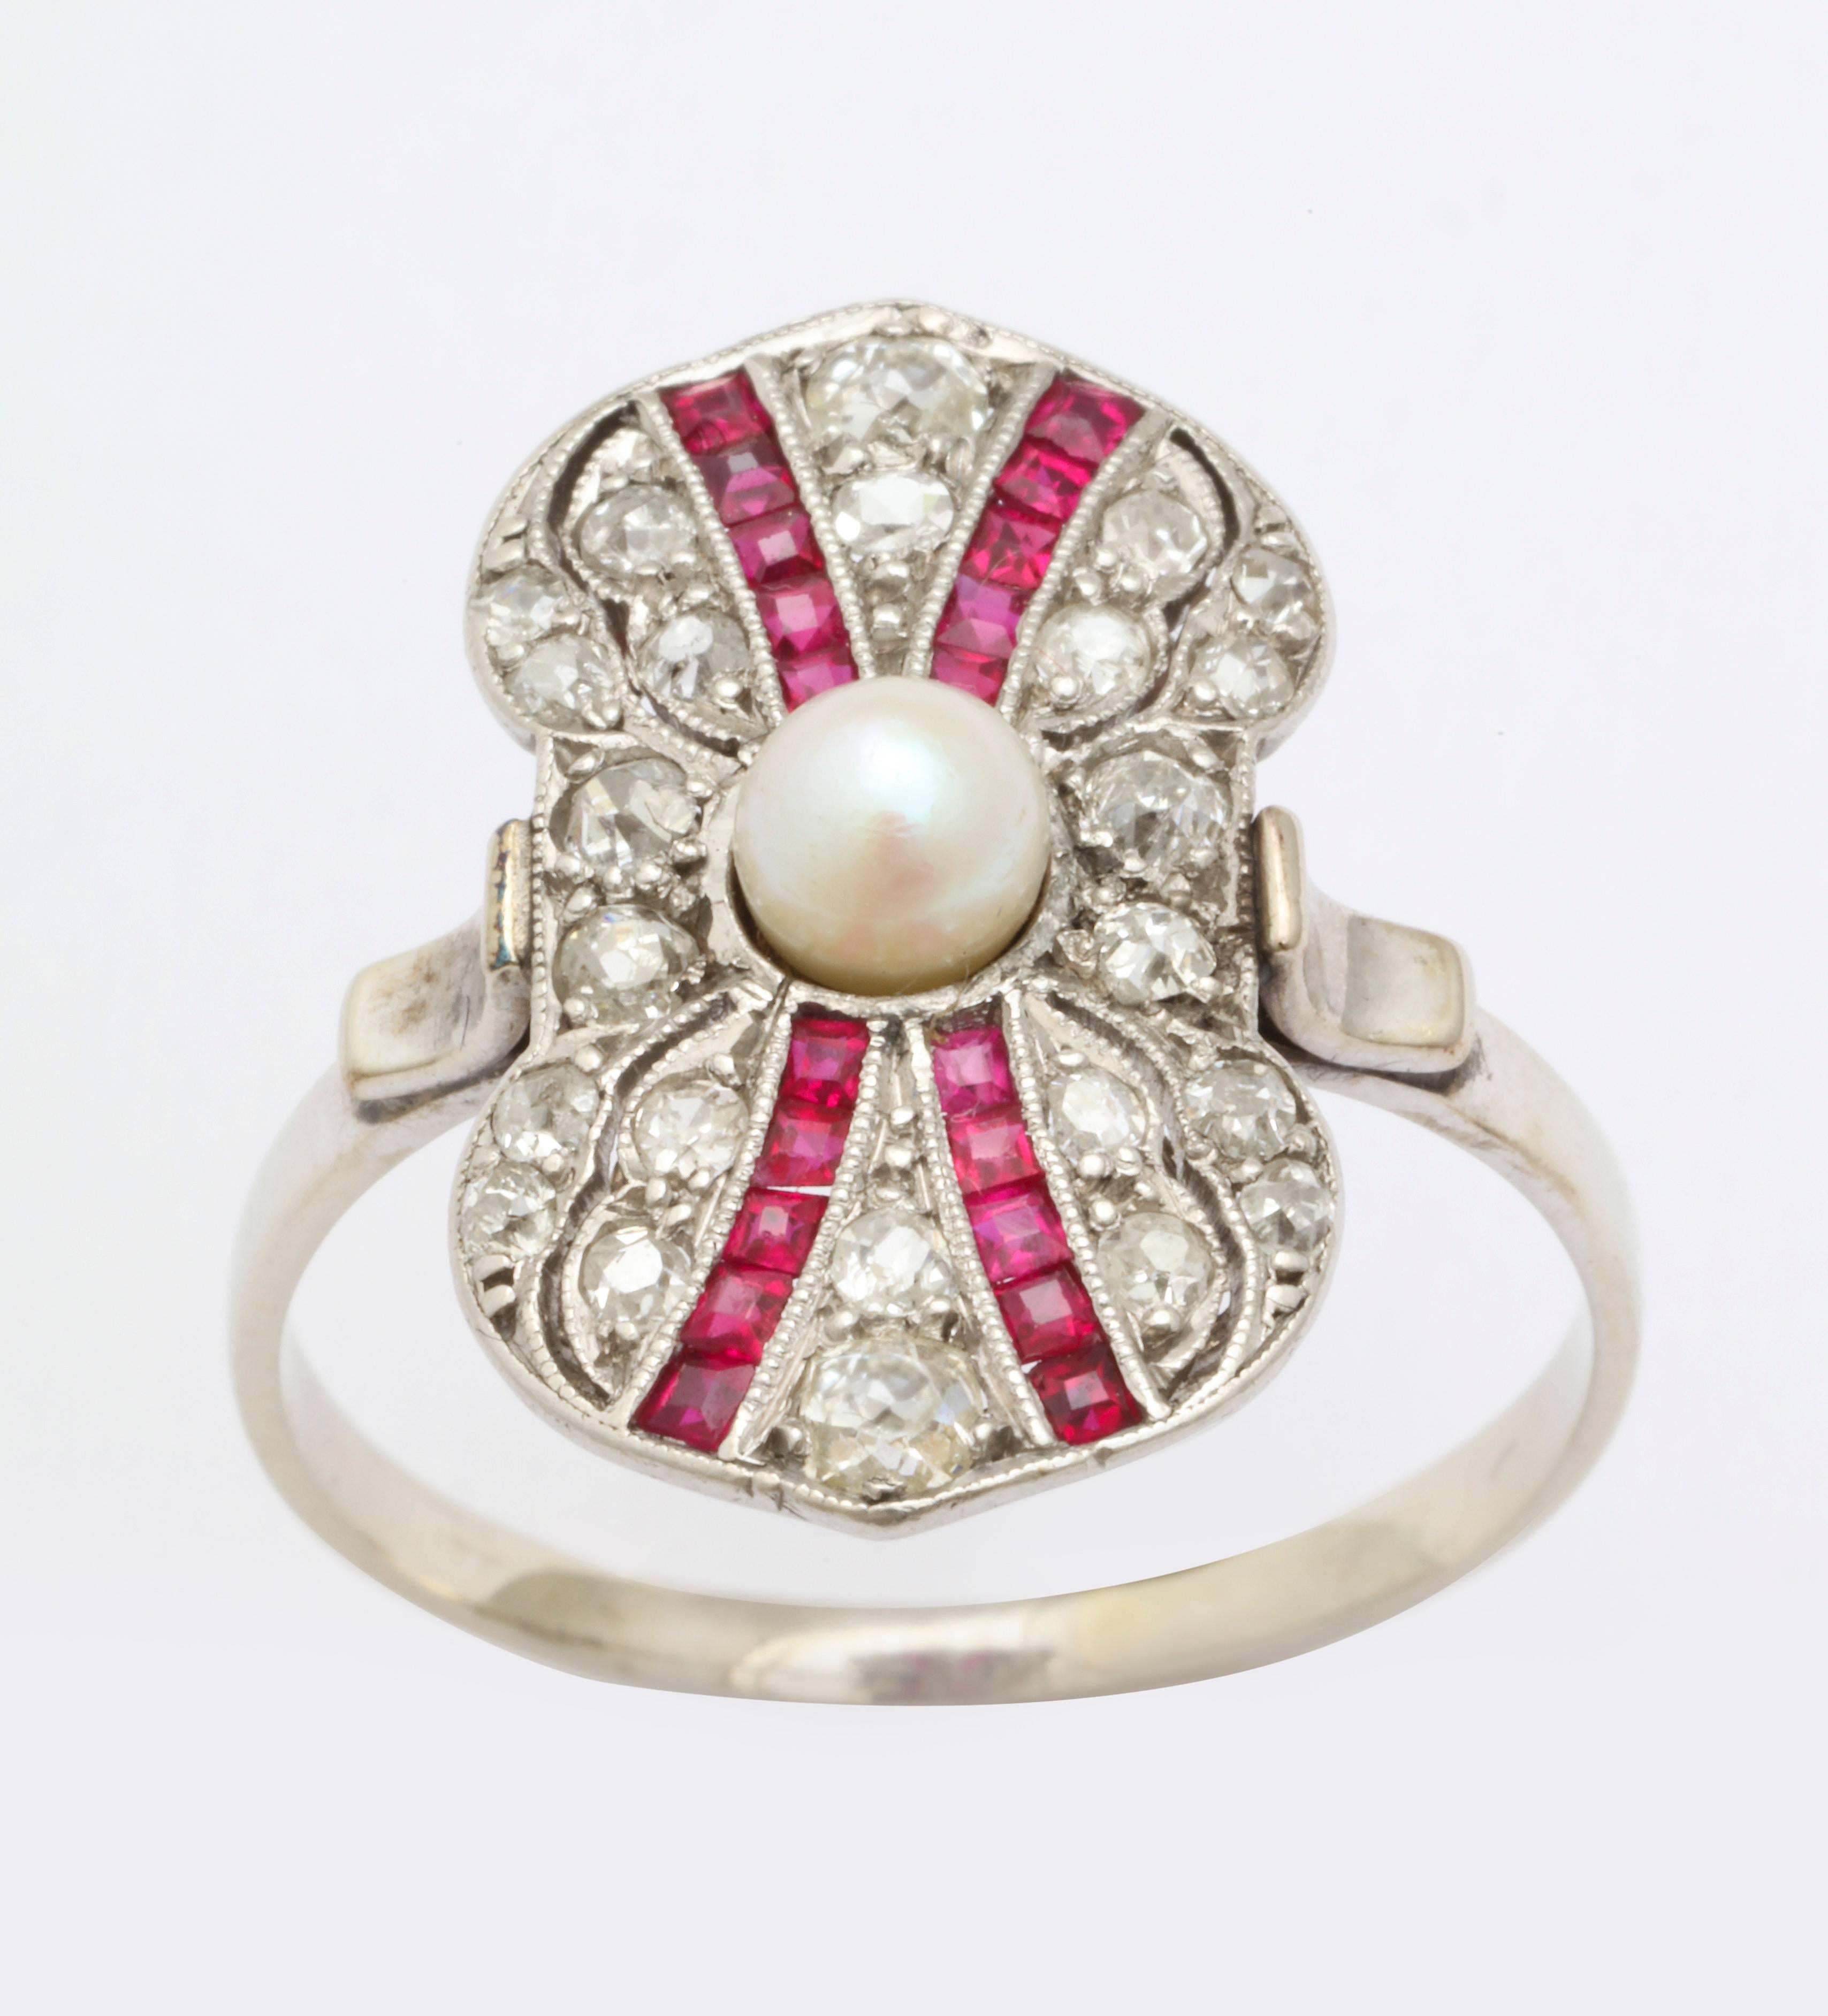 A ring that is a celebration of Art Deco color, form and geometry brings you converging rows of rubies on a background of diamonds, brought together with a central pearl. The outer form is an unusual, irregular bow that is gracefully pinched in the